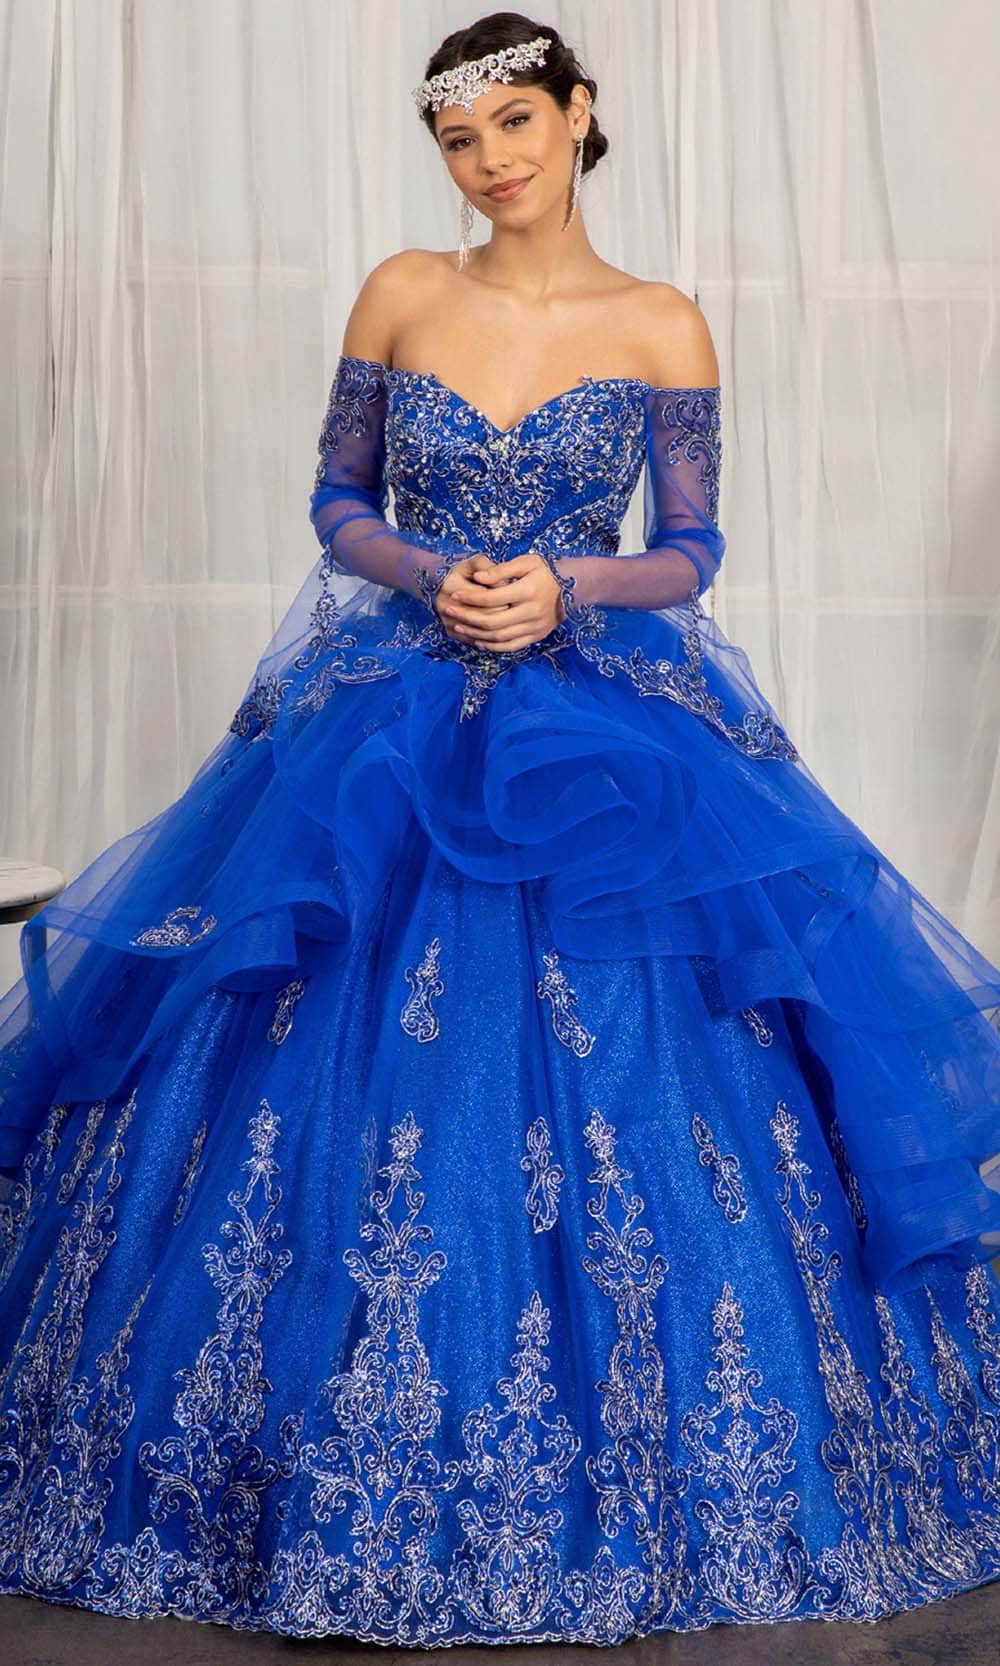 Royal Blue Mermaid Evening Dresses Long Sleeves Velvet Beads High Neck Prom  Gowns For Women 2023 African Gril Gala Party Wear From Veralove999, $109.94  | DHgate.Com